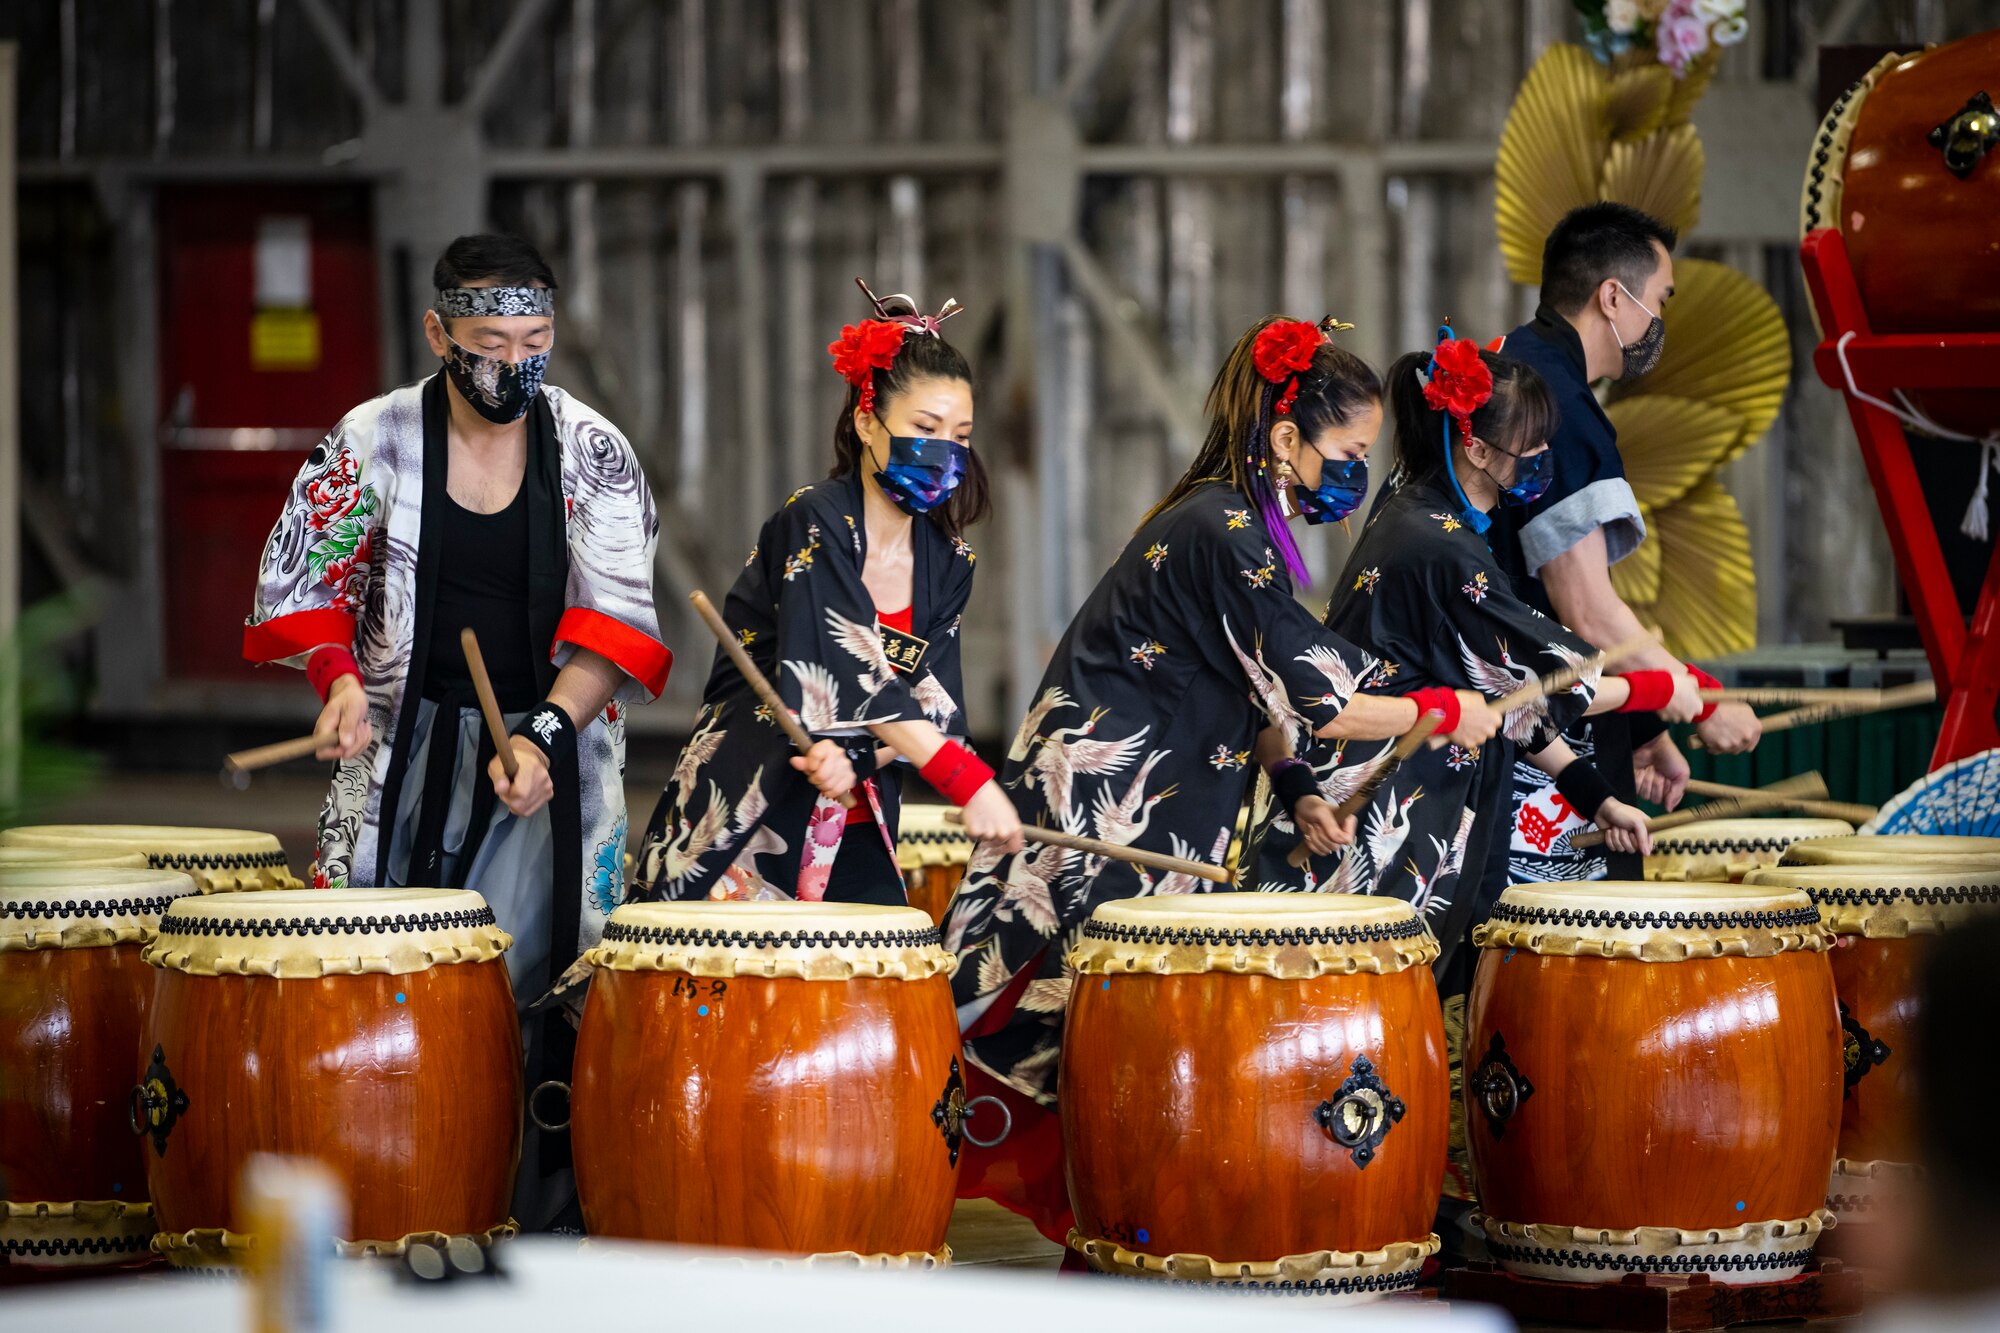 A group of team Misawa members play on drums